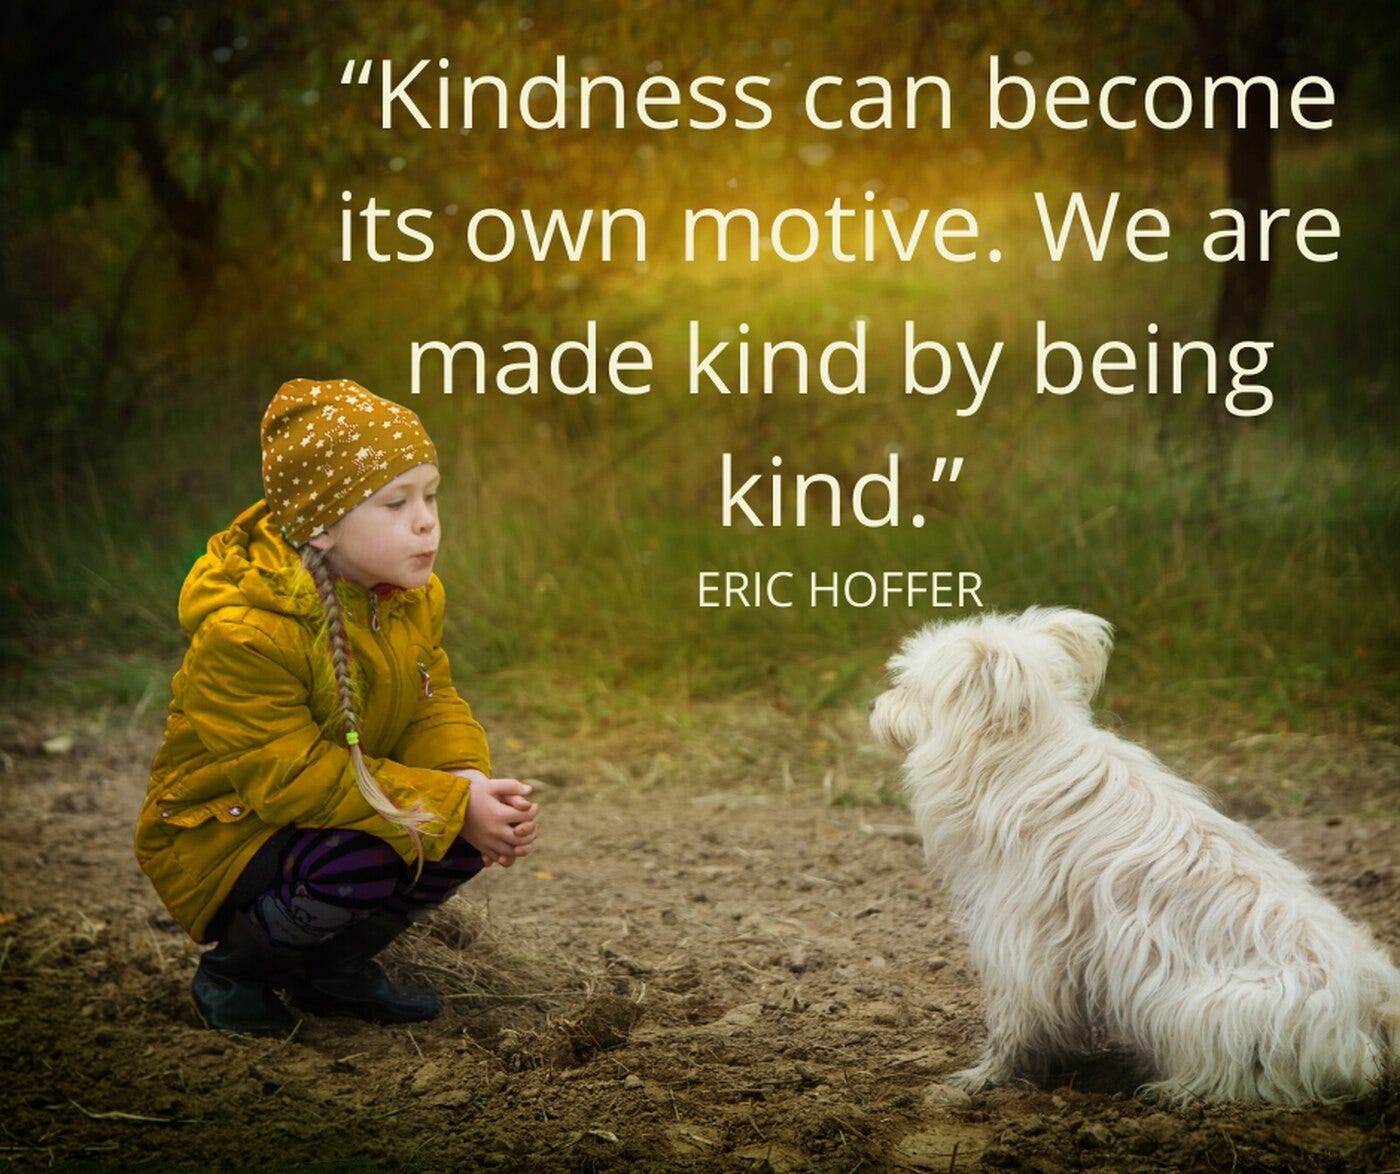 May be an image of 1 person, child, animal and text that says '"Kindness can become its own motive. We are made kind by being kind." ERIC HOFFER'